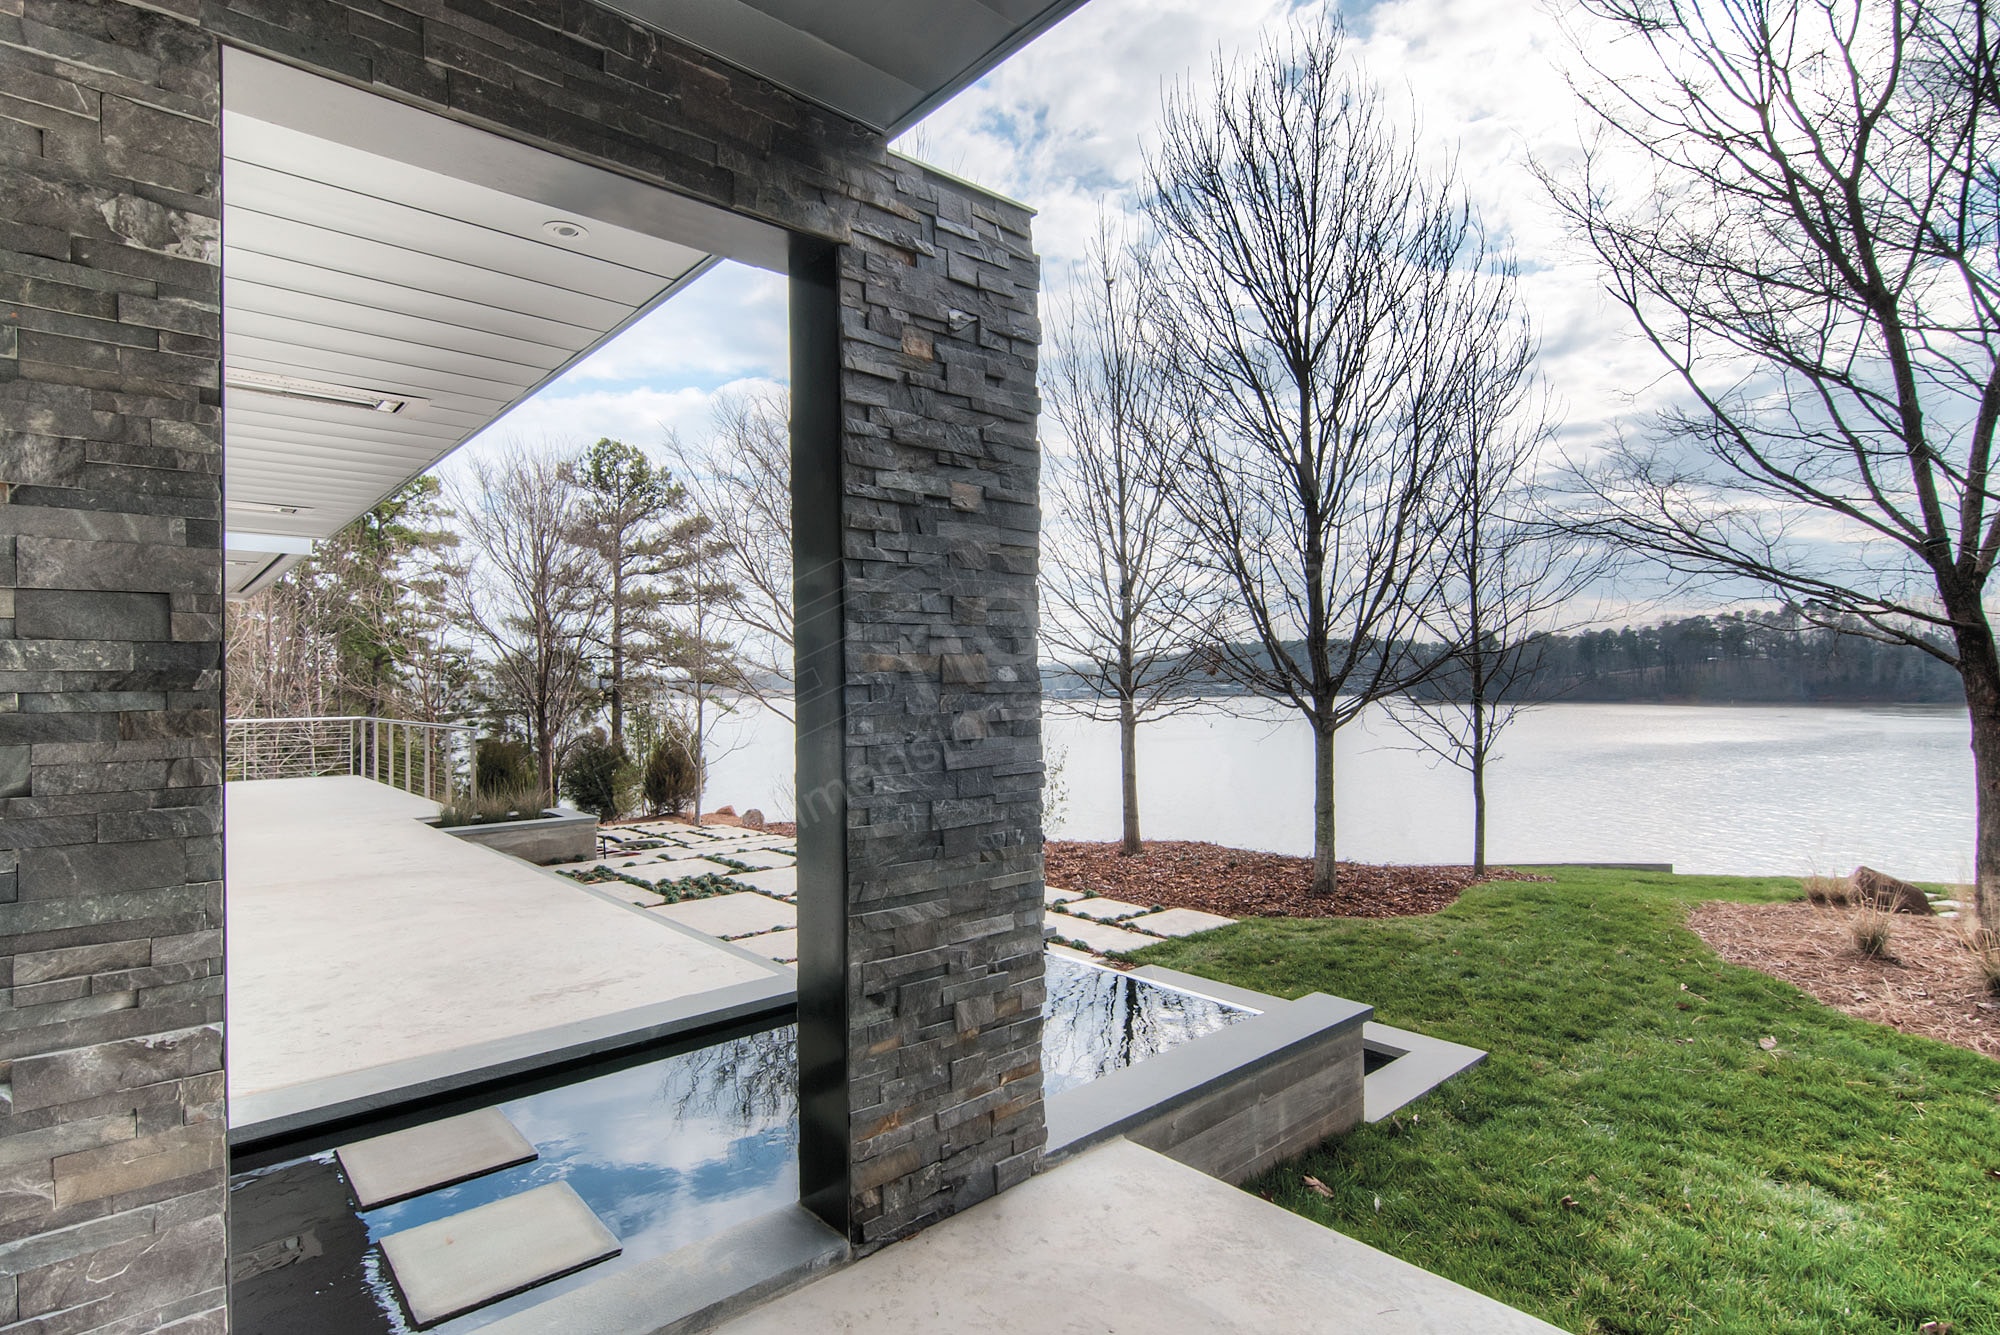 Dry stack stone veneer used exterior on a North Carolina Lake in a freeze thaw climate